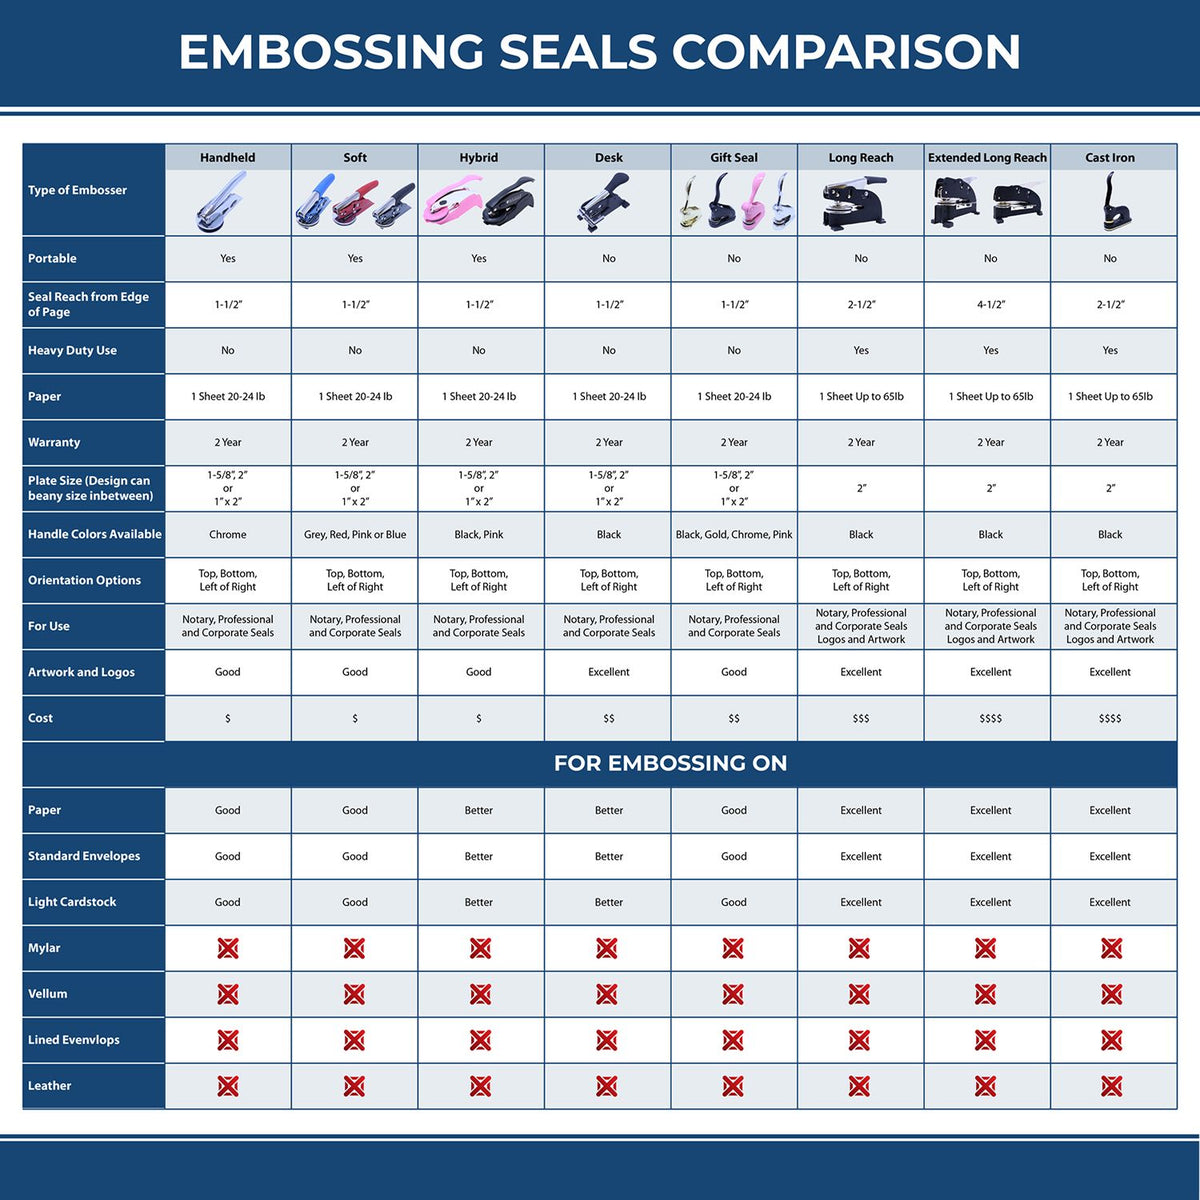 A comparison chart for the different types of mount models available for the Heavy Duty Cast Iron Arizona Land Surveyor Seal Embosser.